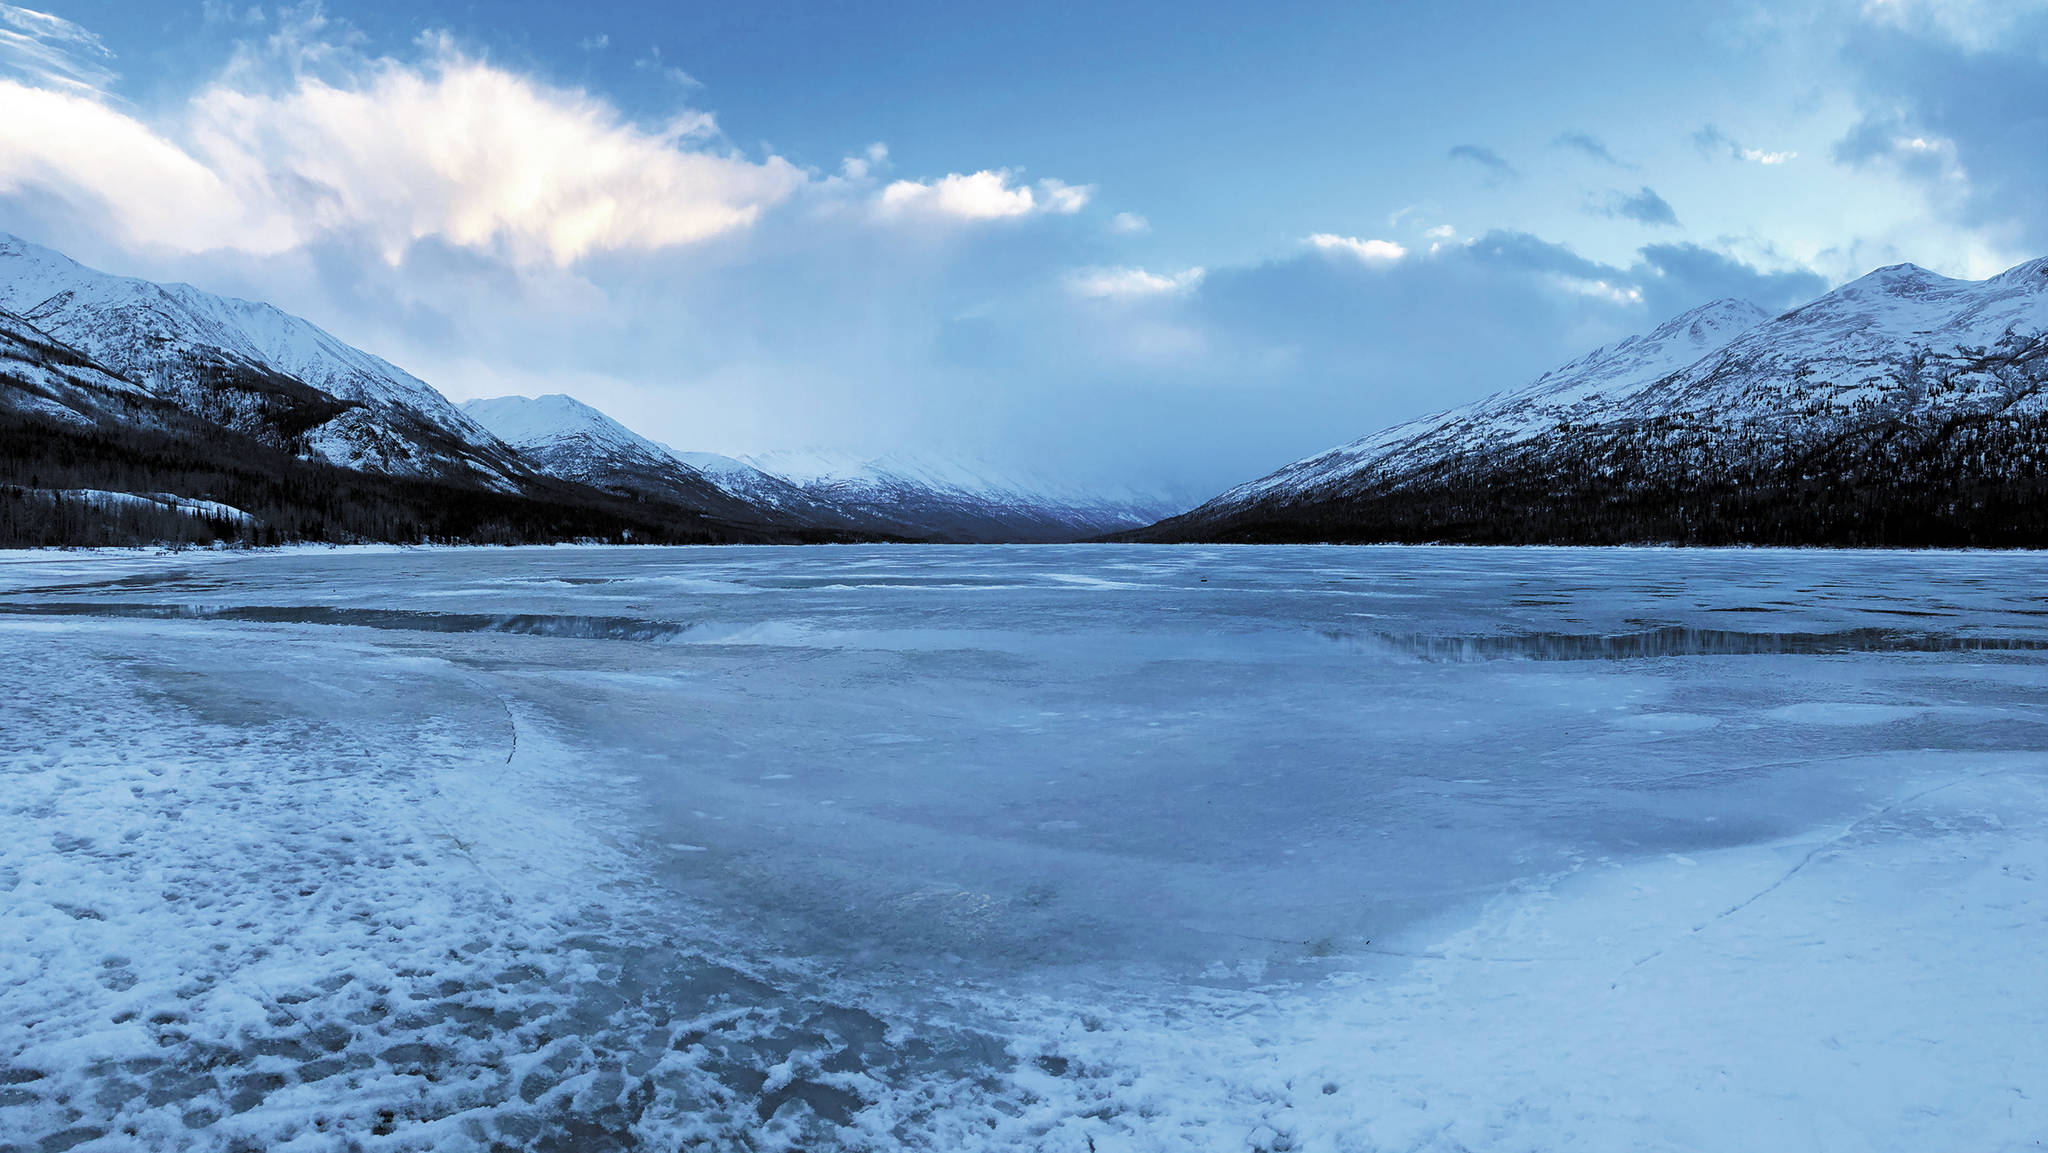 Blue skies can be seen beyond the clouds and fog settling on Eklutna Lake on Monday, Dec. 28, 2020 near Eagle River, Alaska. (Photo by Megan Pacer/Homer News)